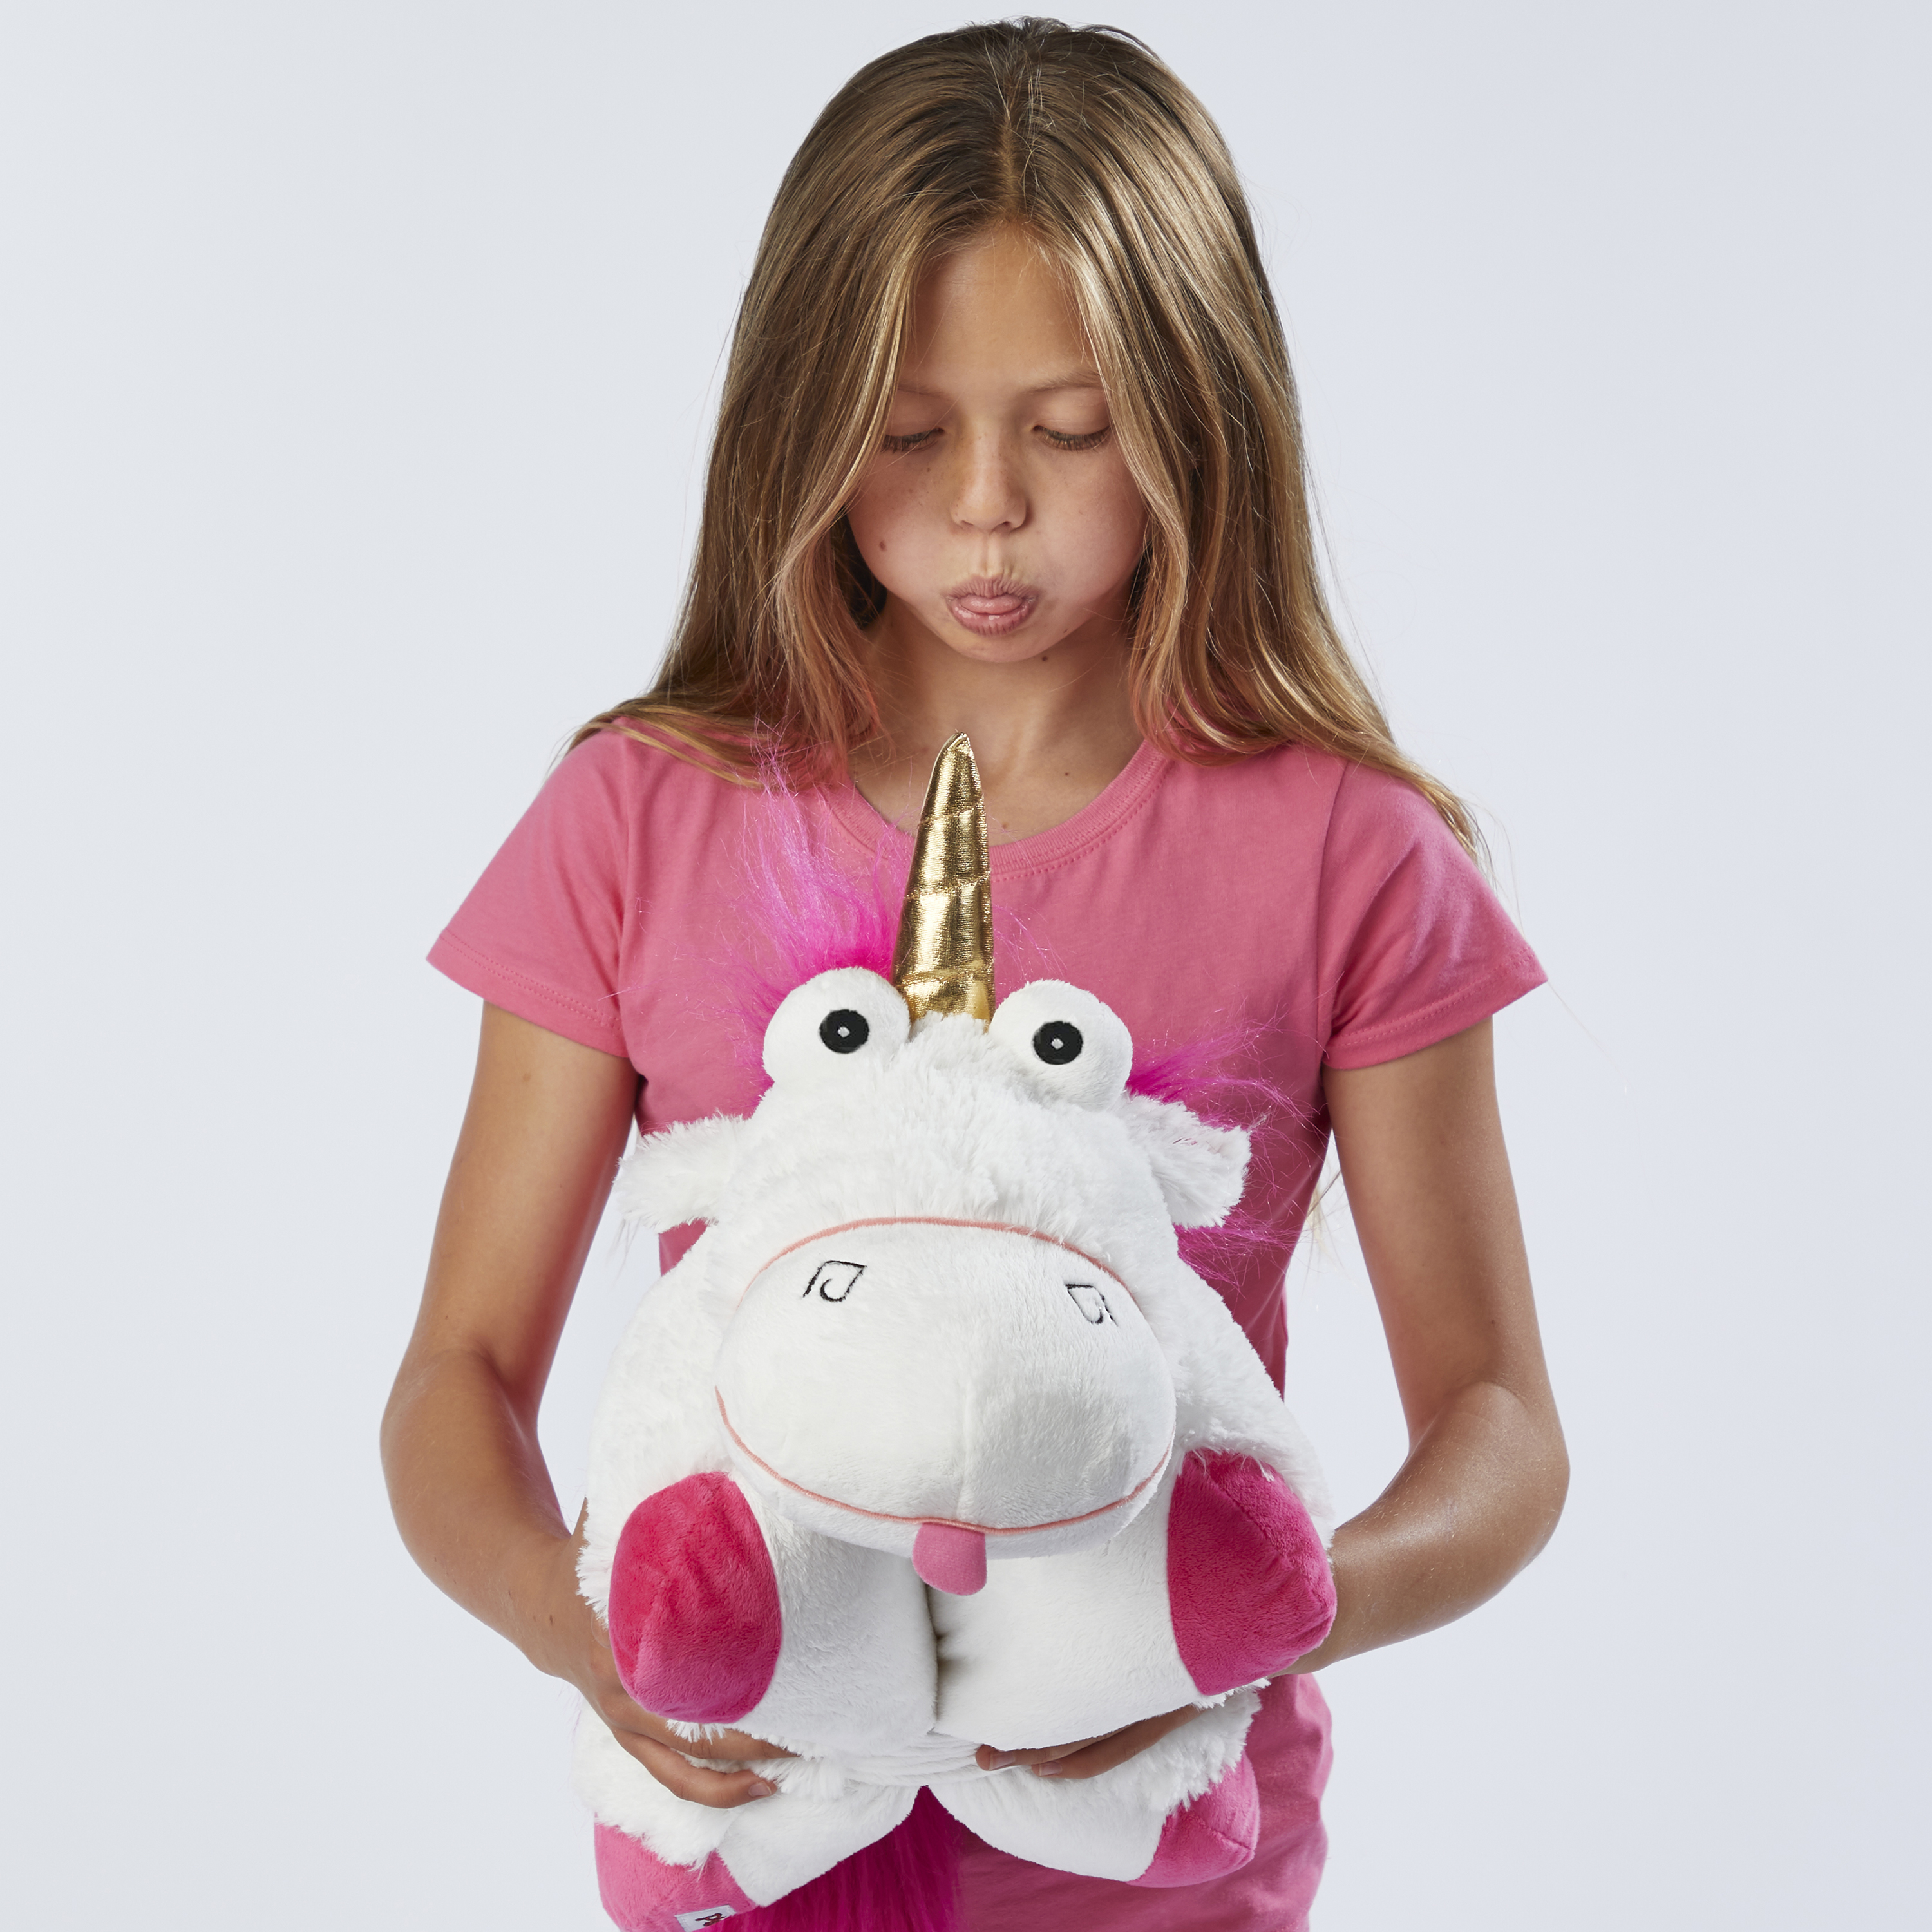 Pillow Pets NBCUniversal Despicable Me Fluffy the Unicorn Stuffed Animal Plush Toy - image 3 of 4